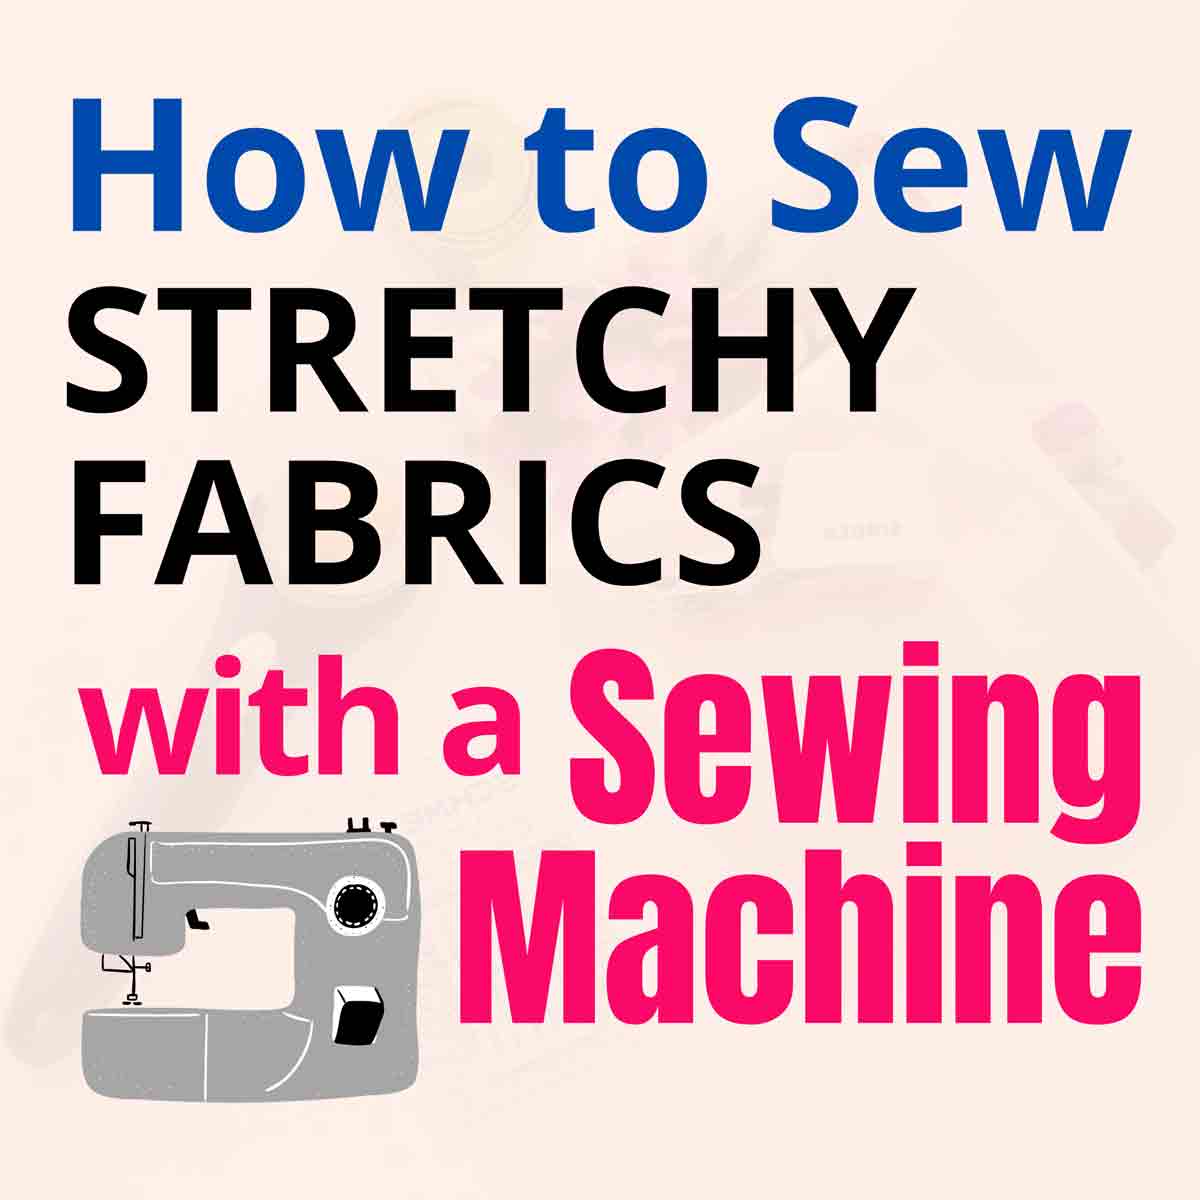 Featured image for how to sew knits post with text overlay "How to Sew Stretchy Fabrics with a Sewing Machine